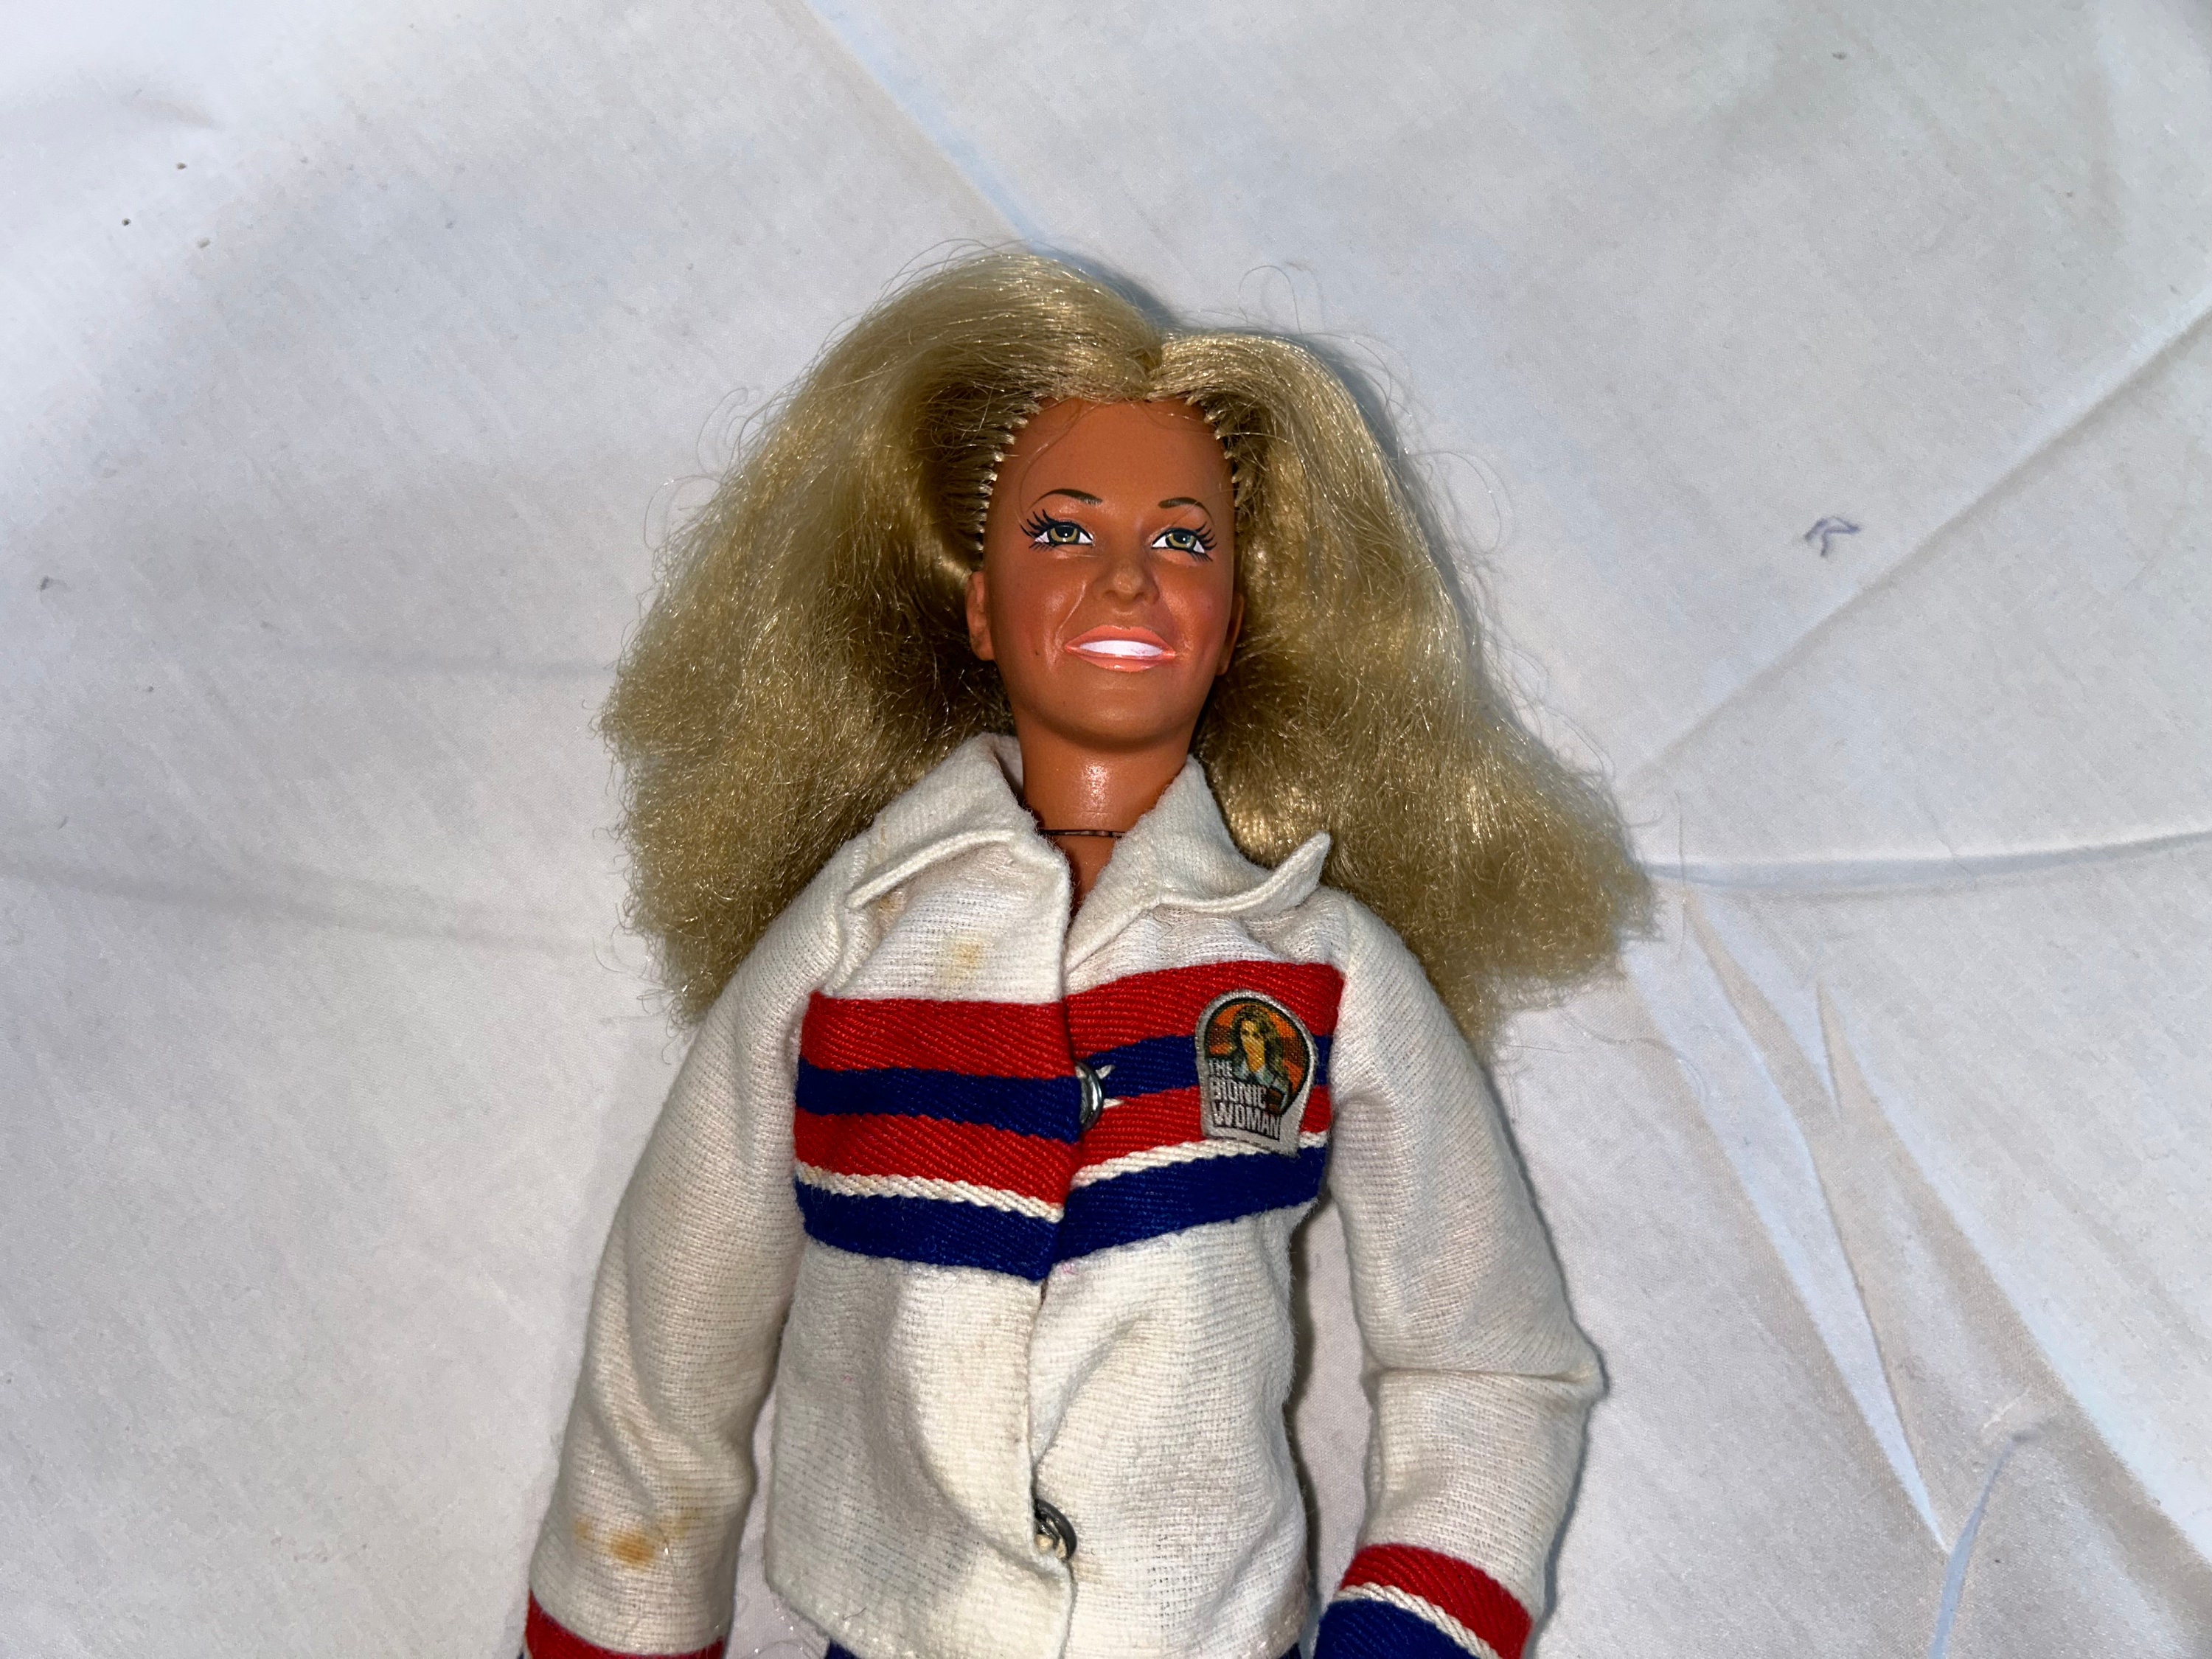 Vintage 1970s KENNER BIONIC WOMAN Jaime Sommers Doll -  Canada